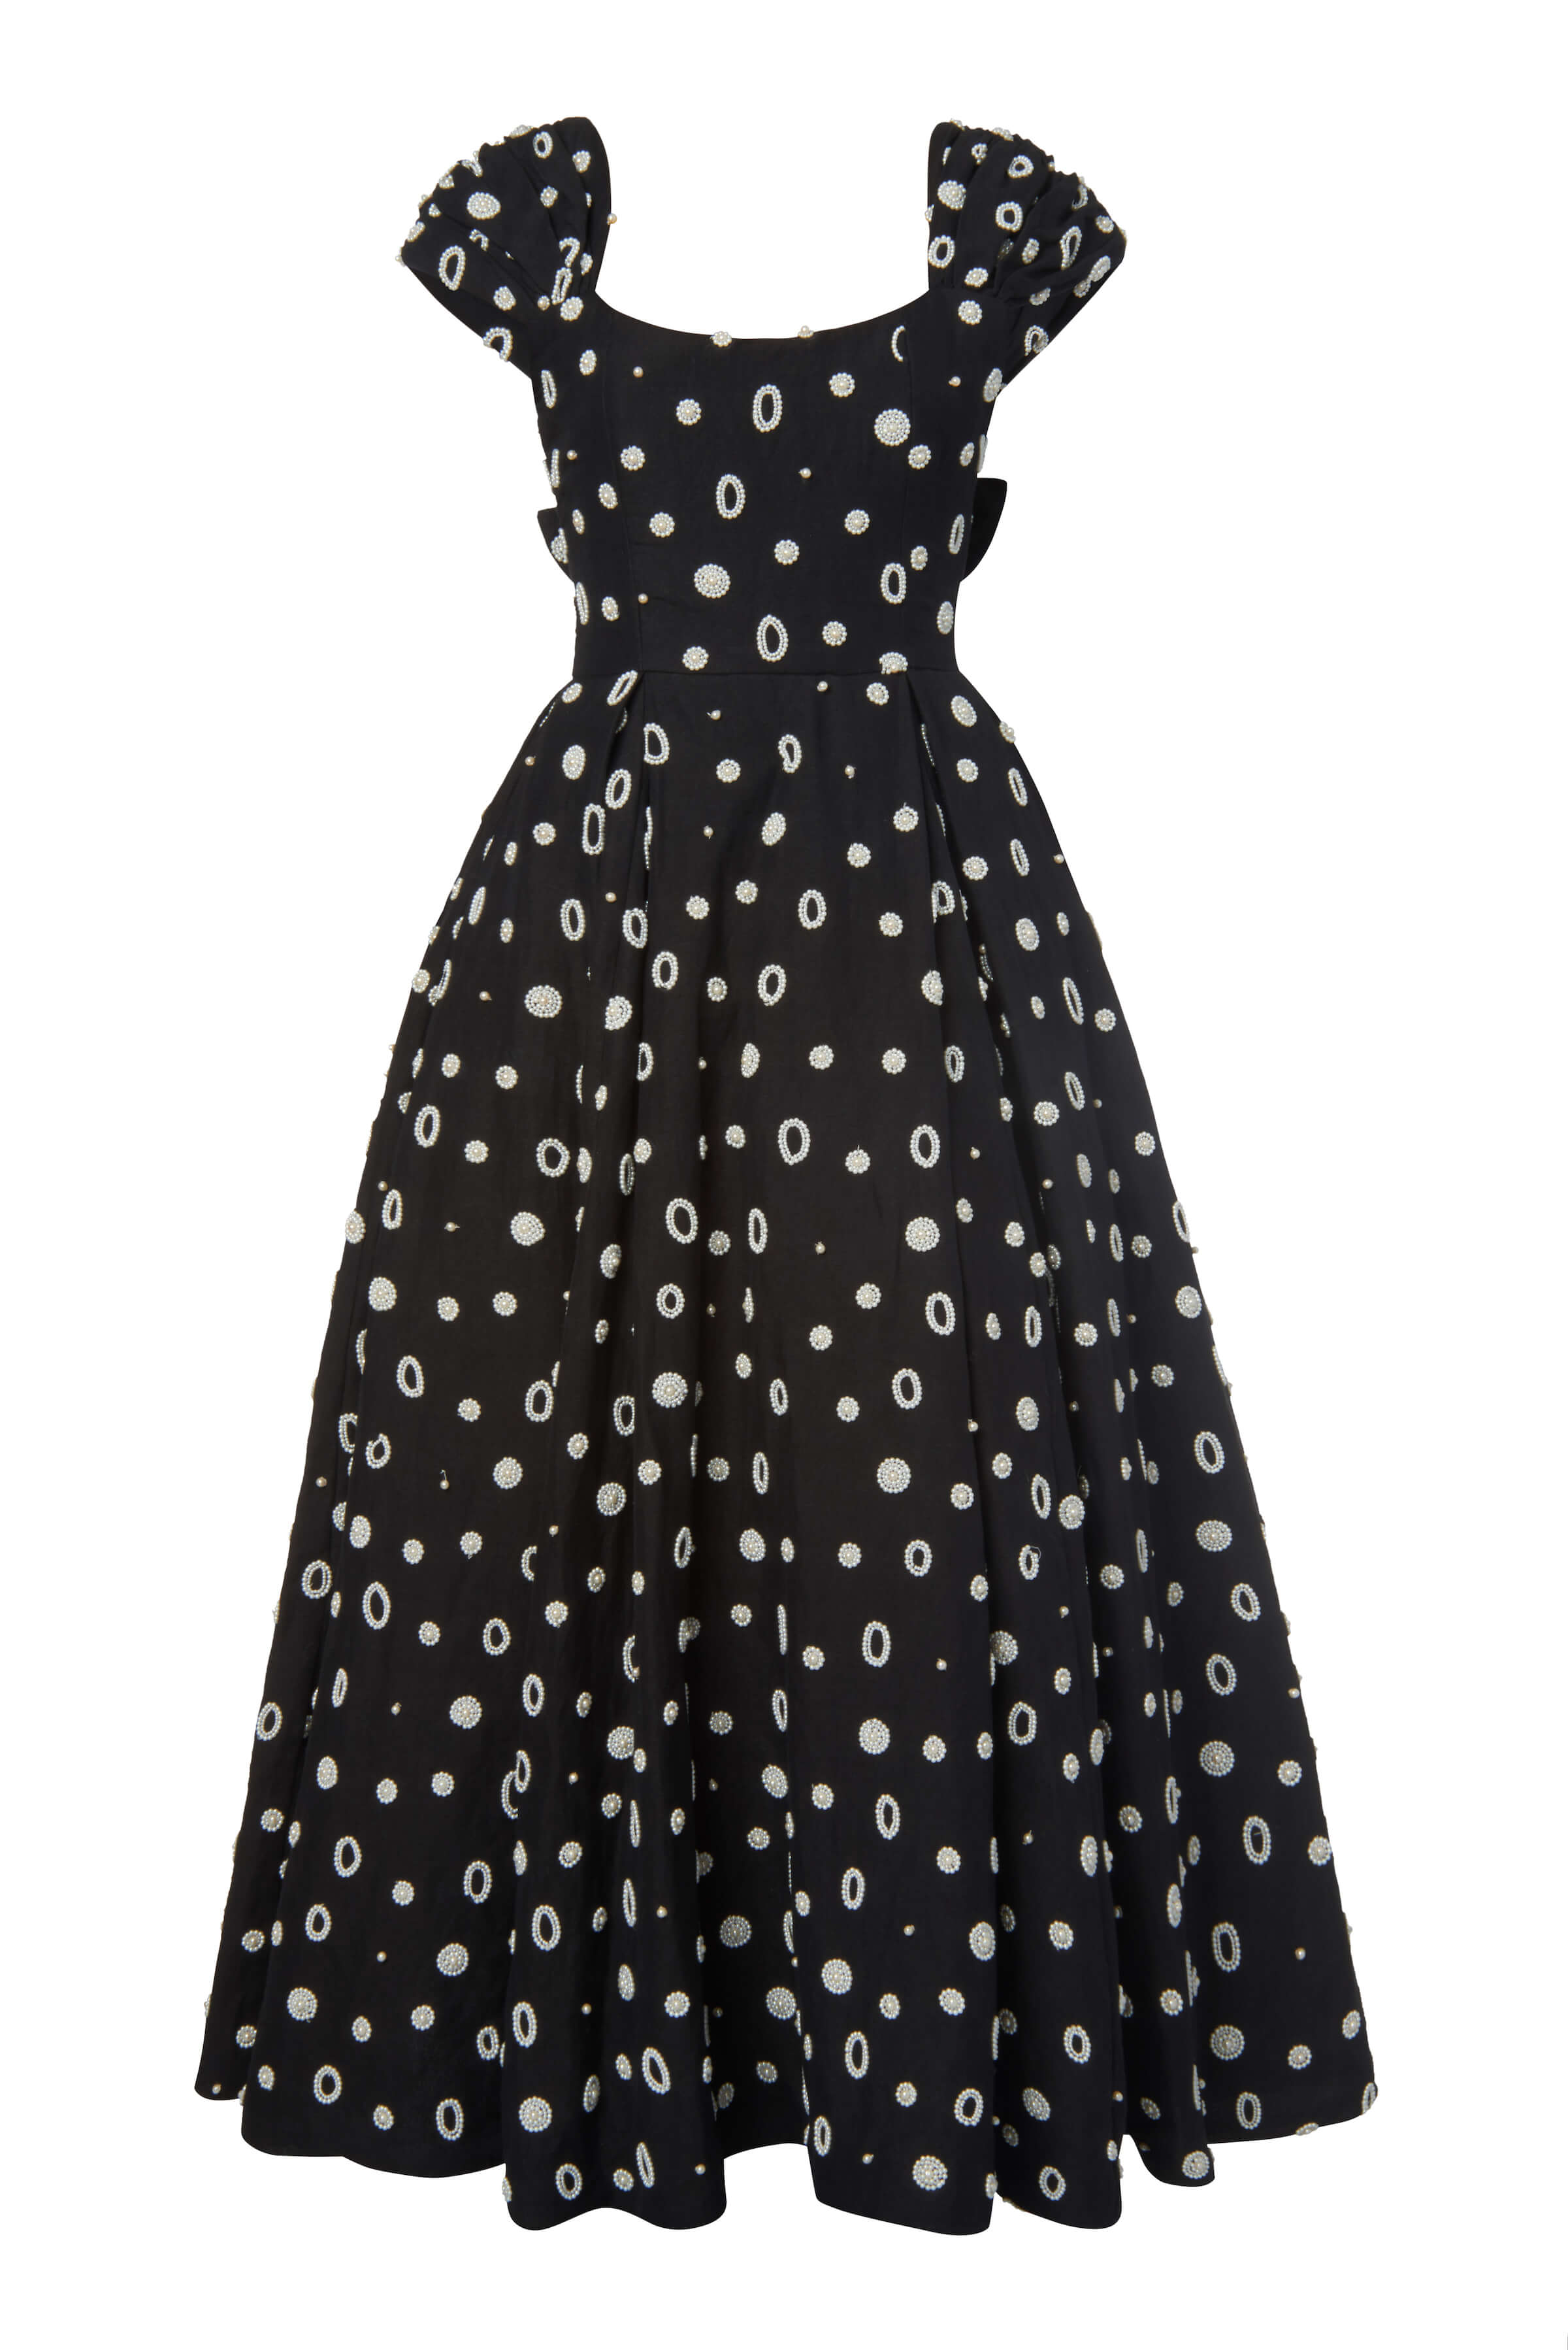 Belladonna Black Embroidered Pearl Cap Sleeve Dress with Bow Details